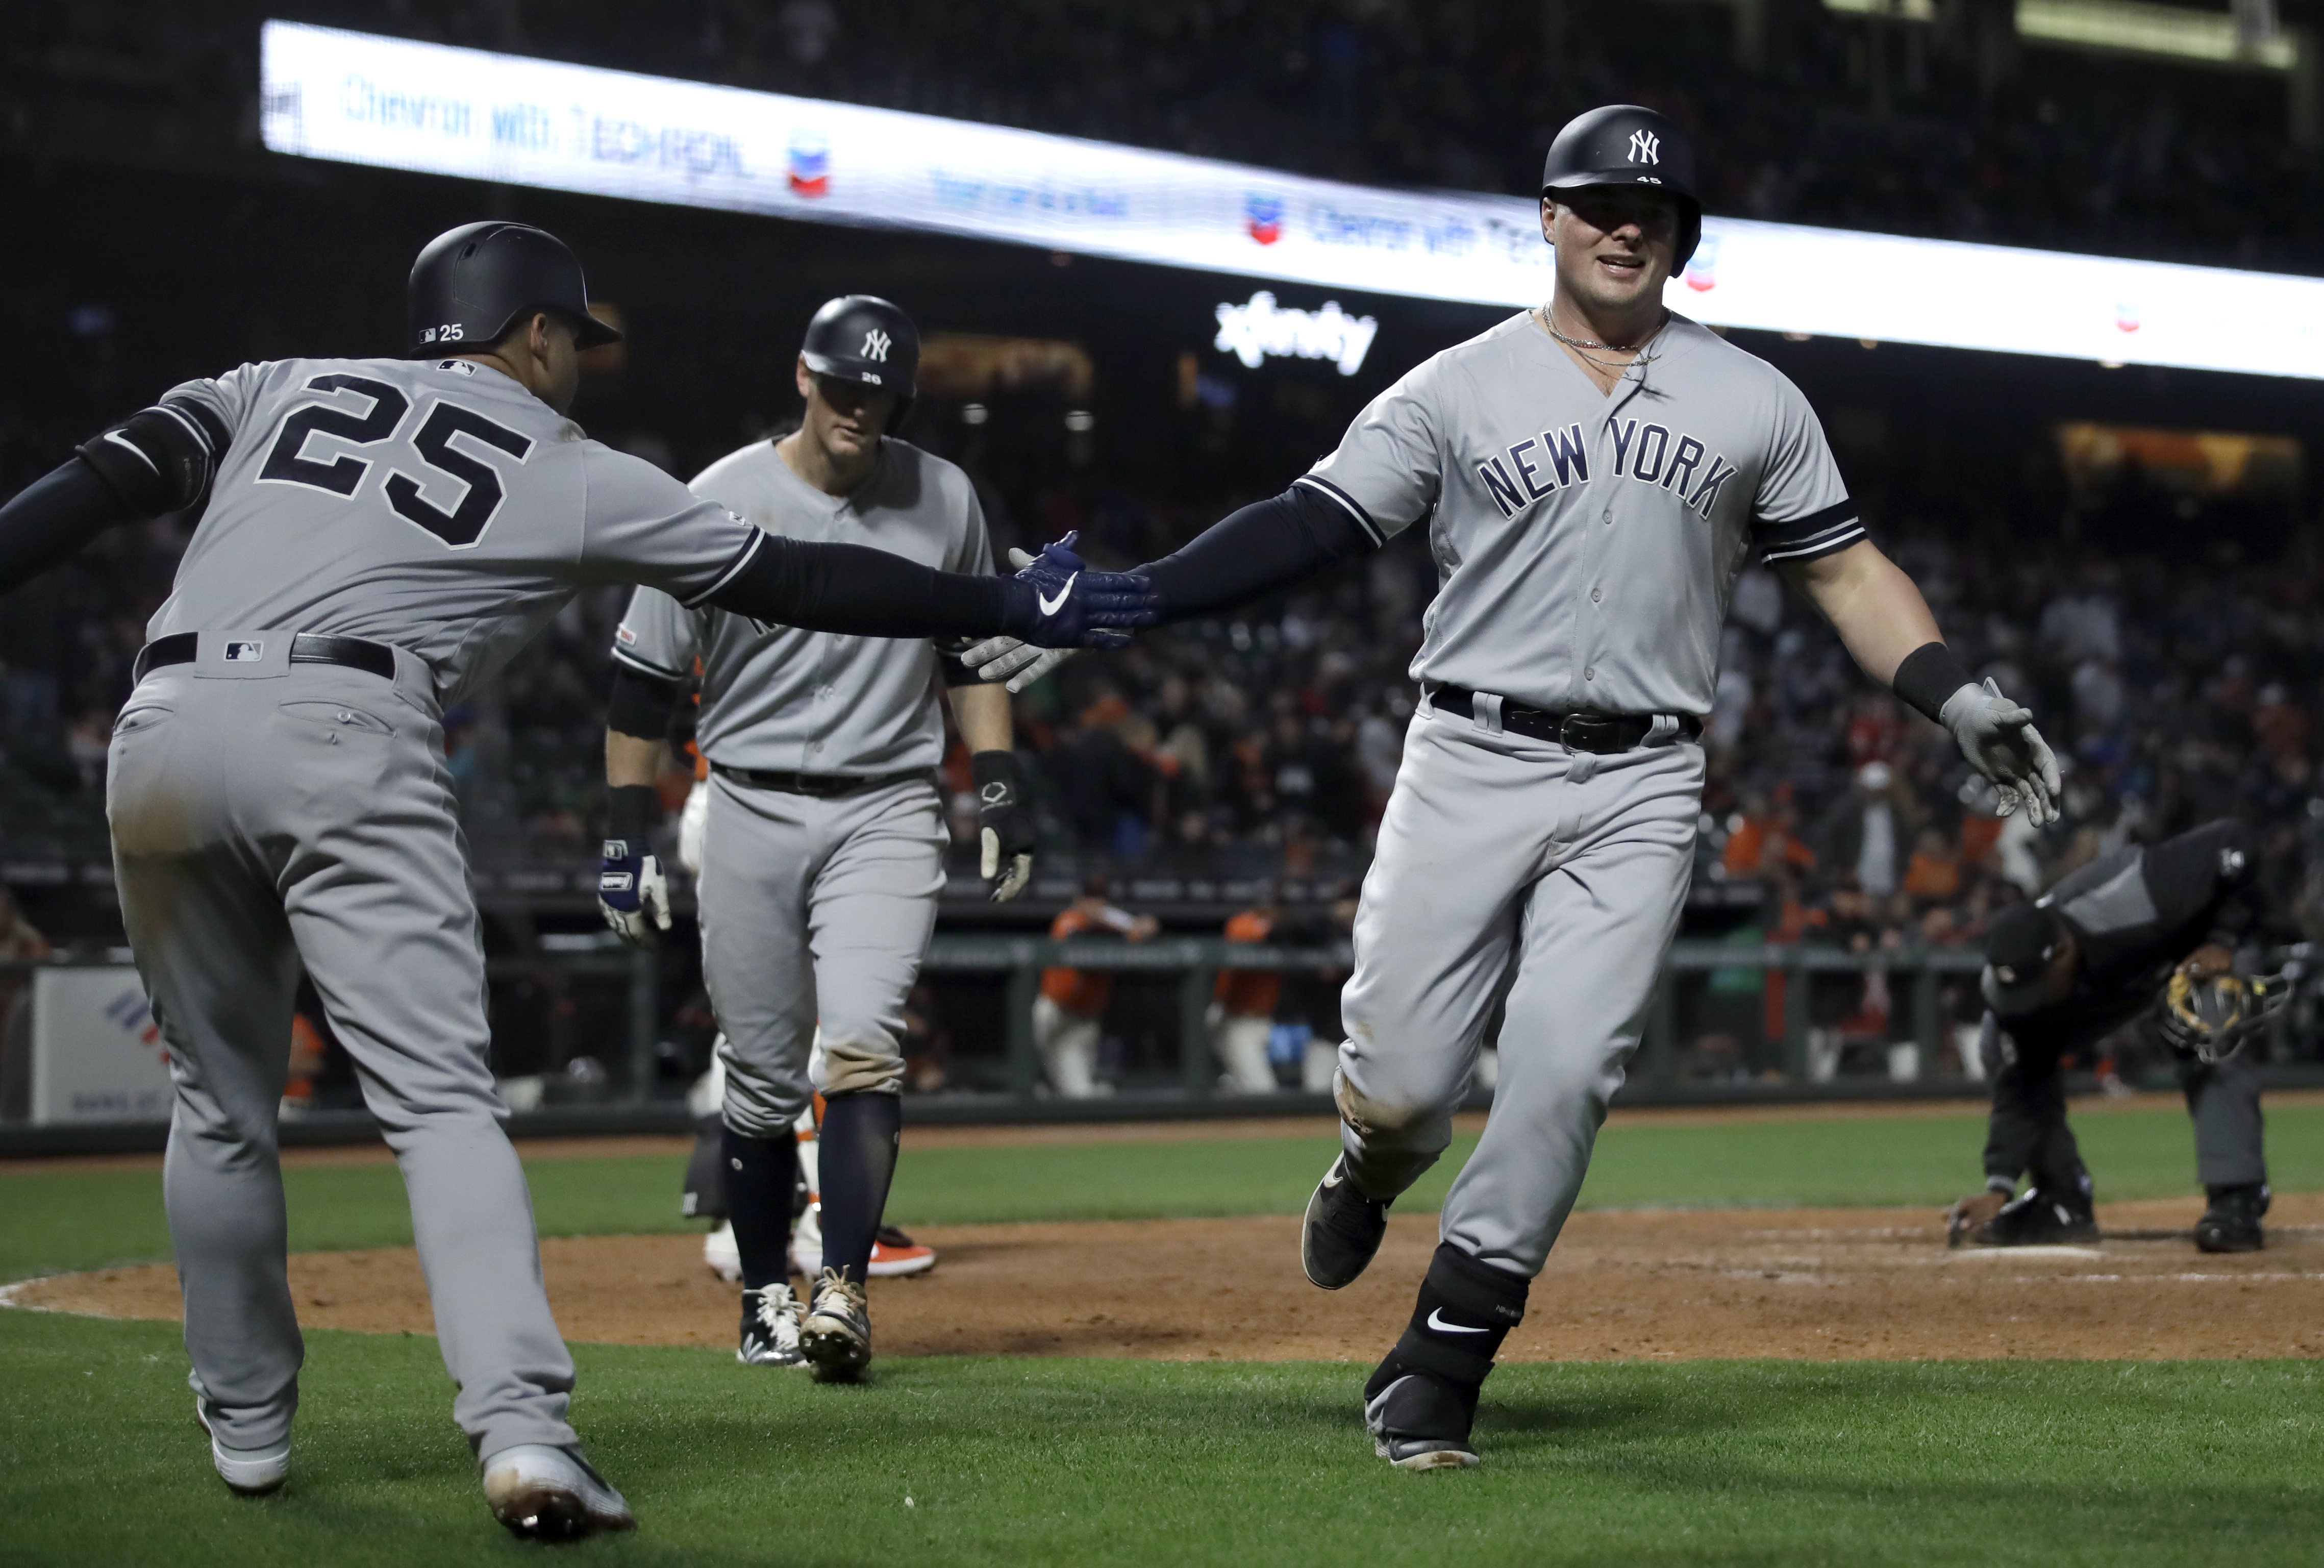 Voit homers, drives in 3 to power Yankees past Giants, 7-3